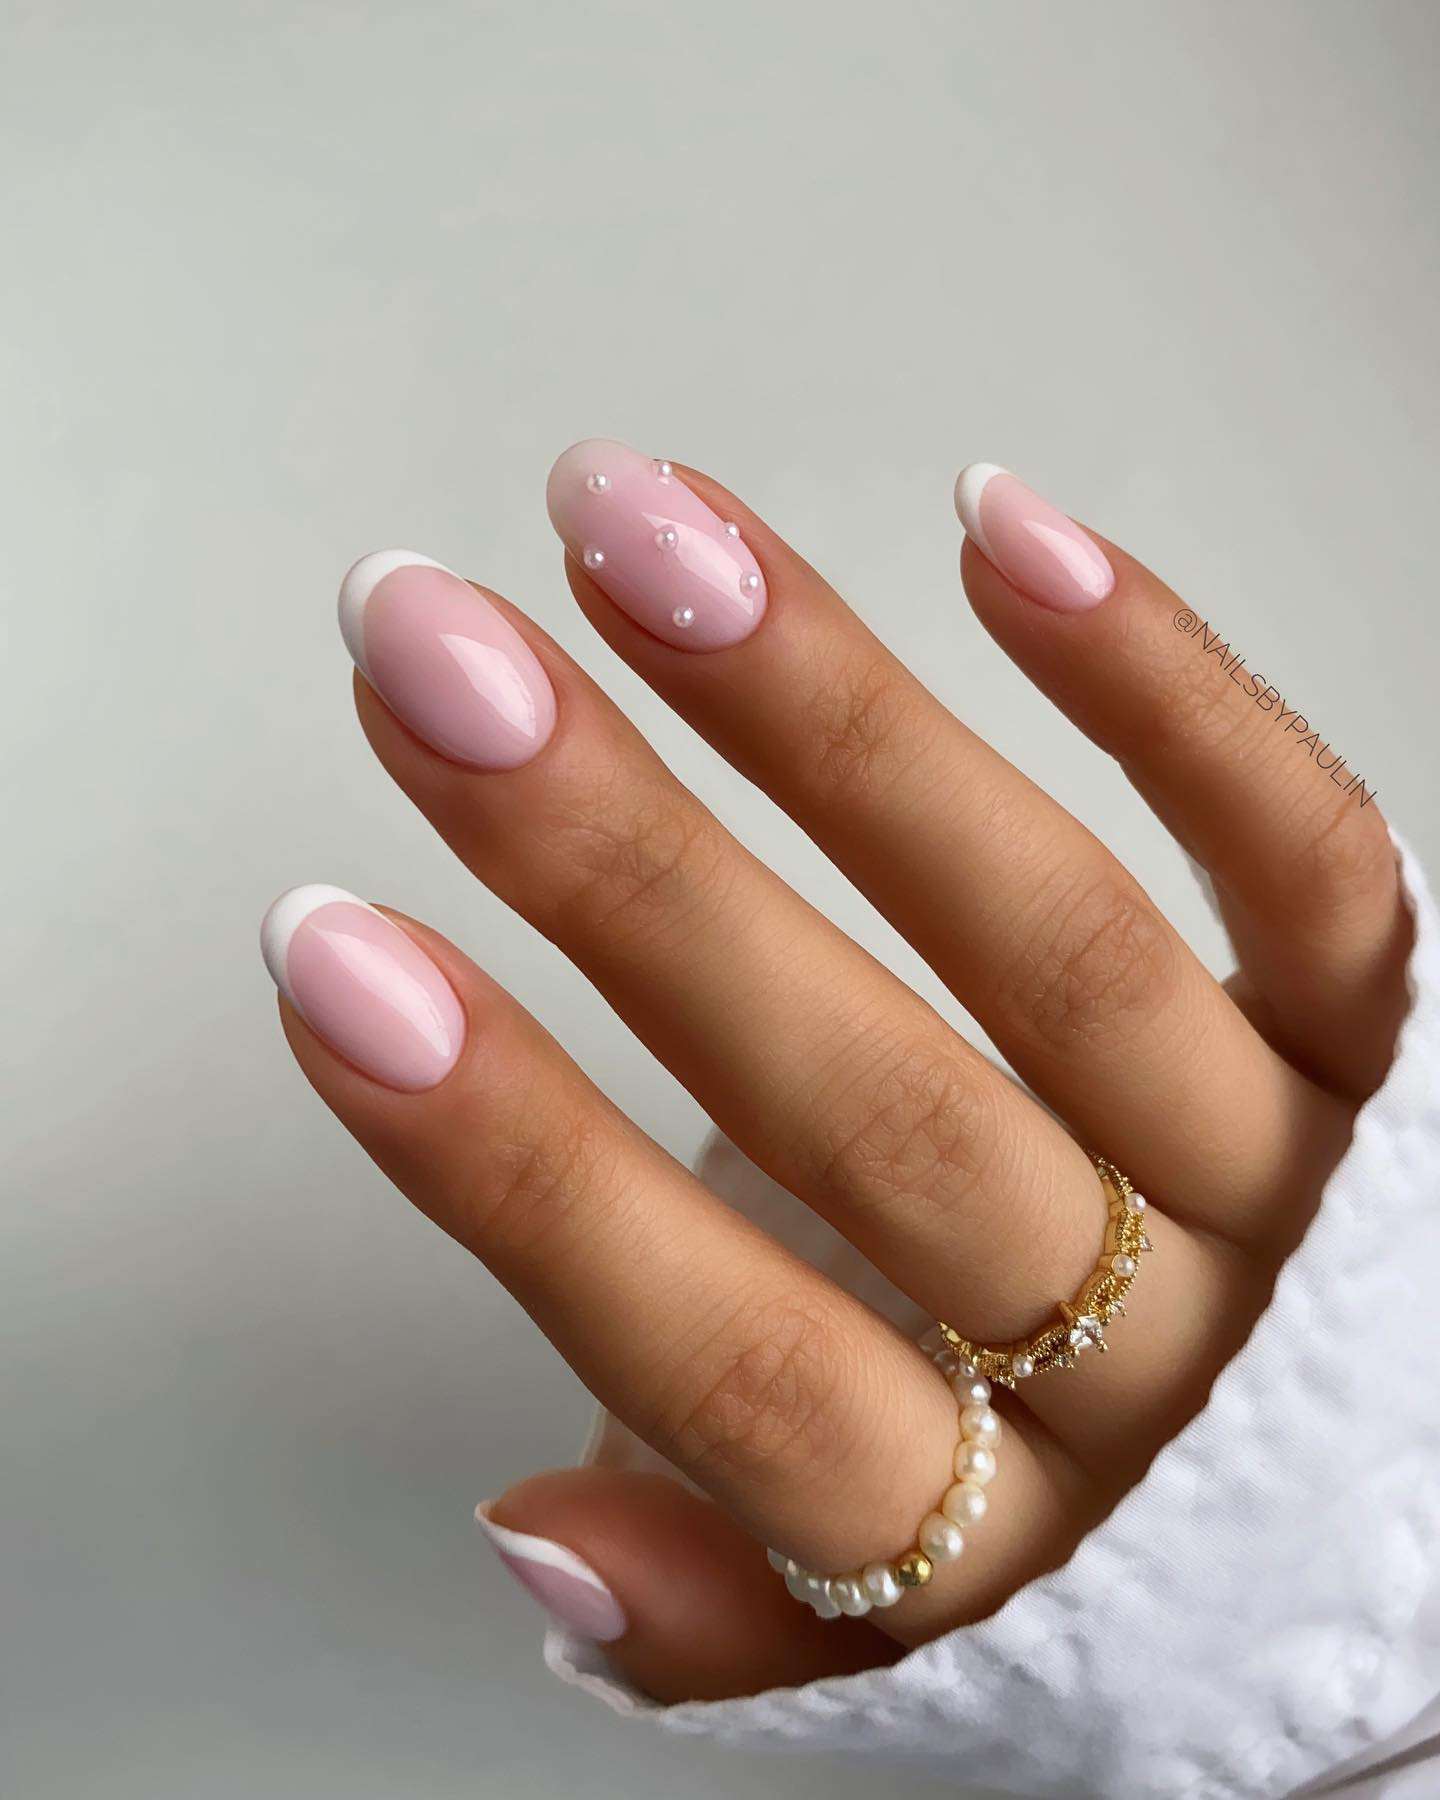 35 Nail Designs For 2022 You’ll Want To Try Immediately images 2